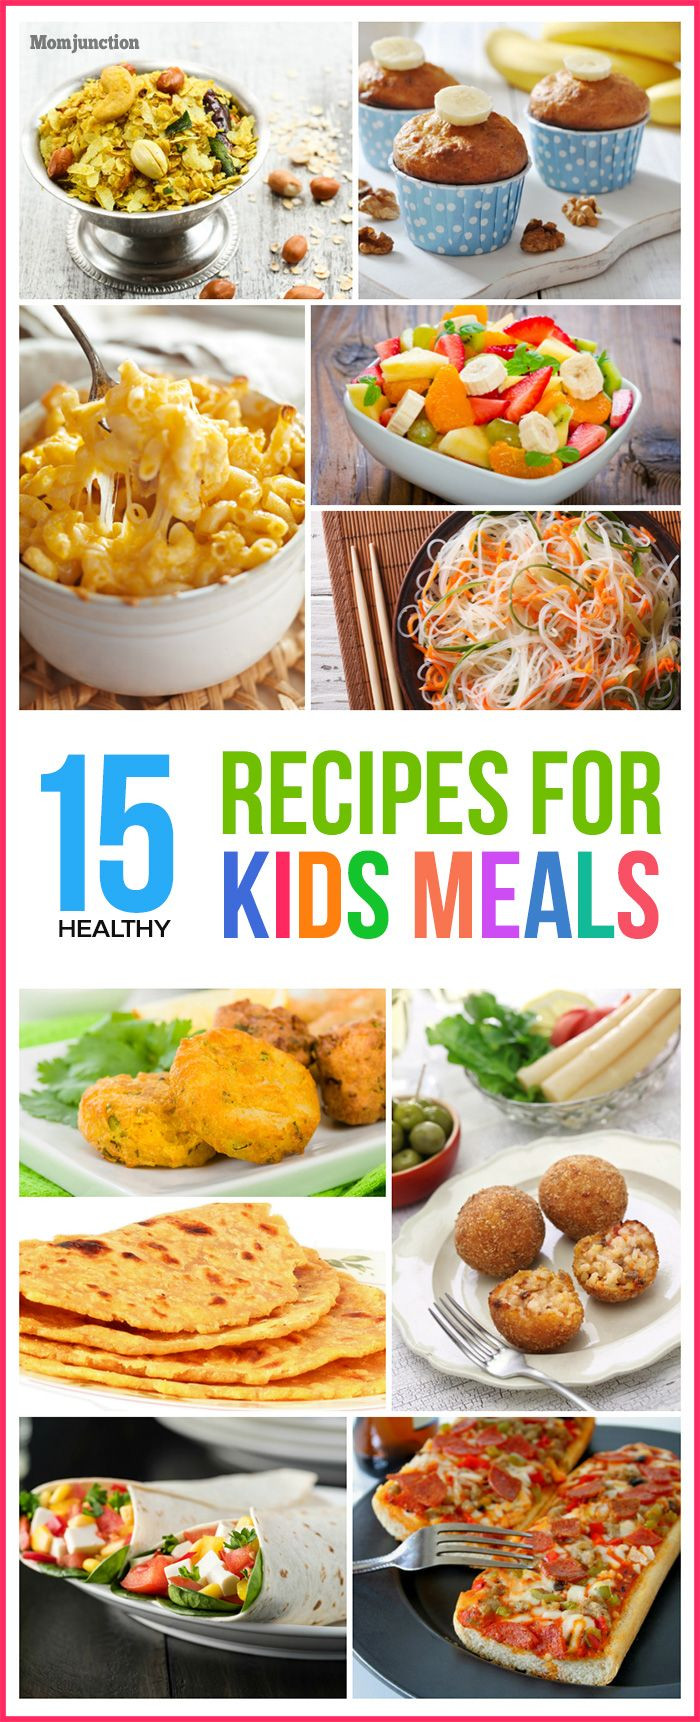 Recipes For Picky Kids
 Top 15 Healthy Recipes For Kids Meals